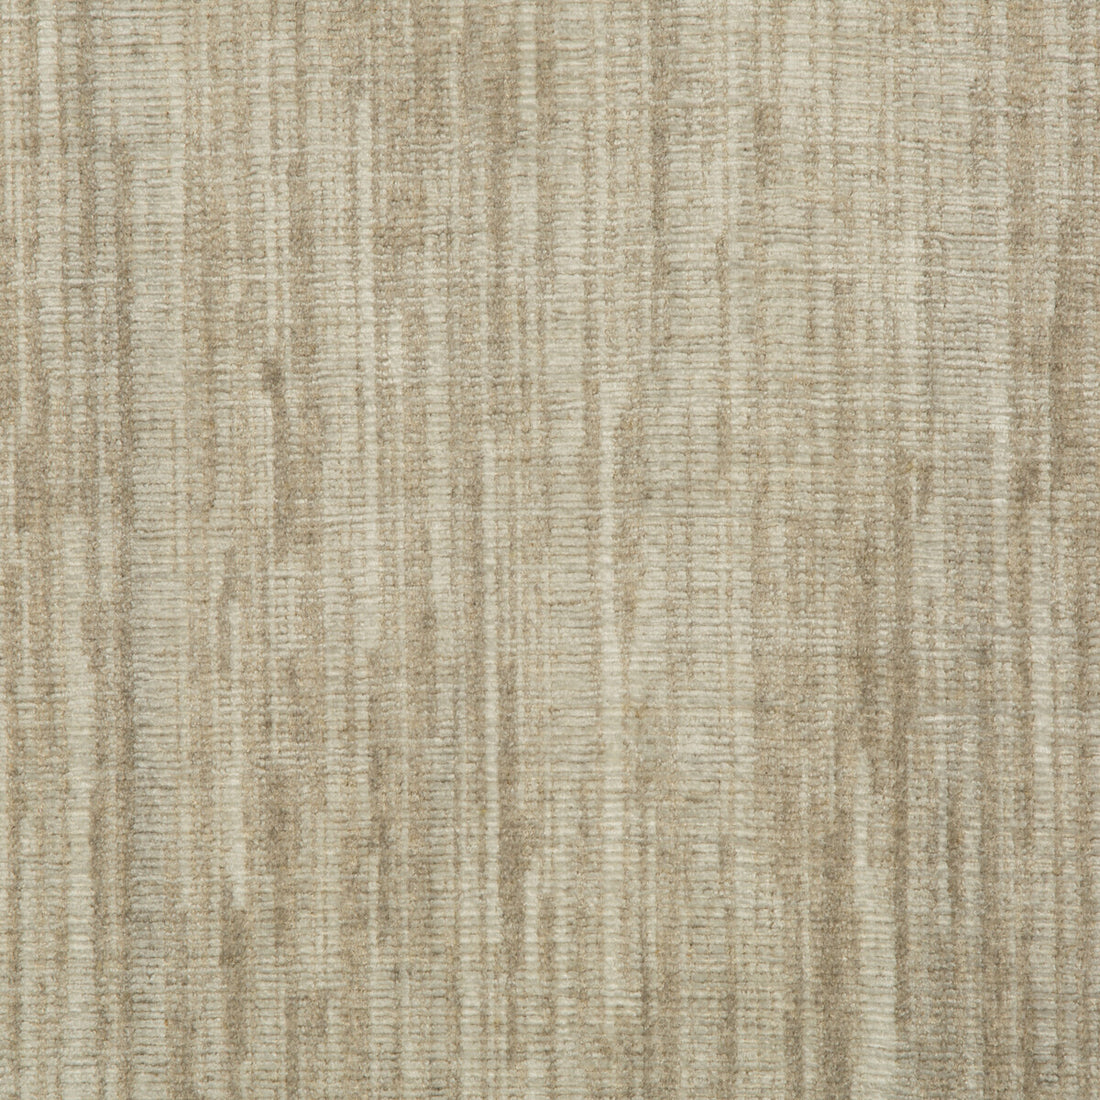 Now And Zen fabric in linen color - pattern 35445.16.0 - by Kravet Couture in the Izu Collection collection